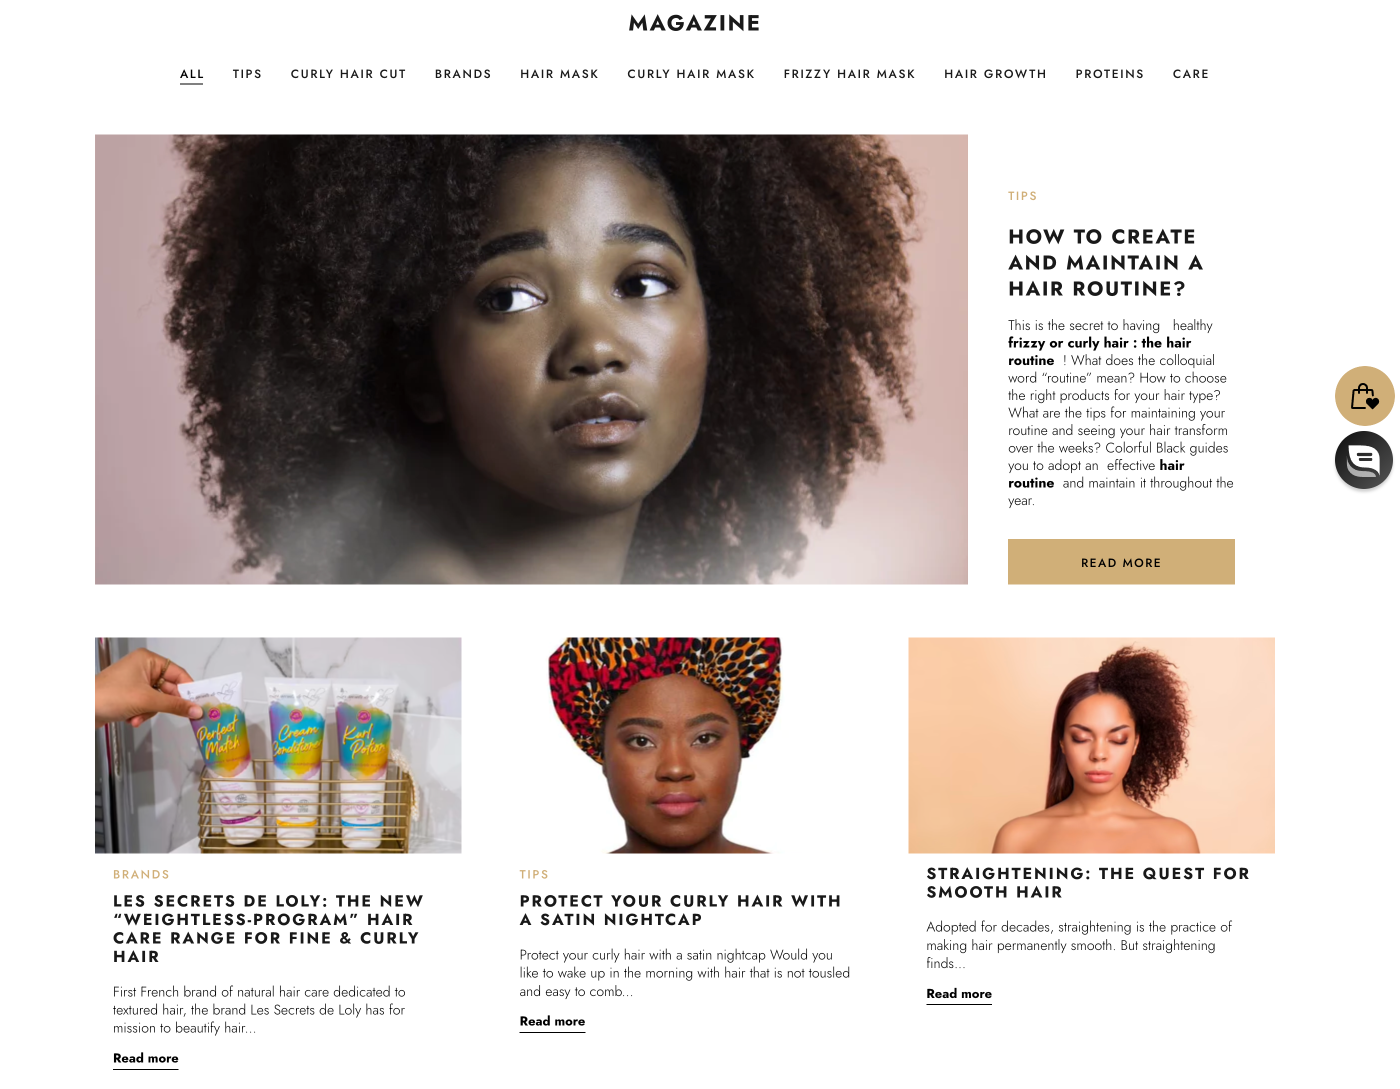 Mental Wellness Brands for World Mental Health Day–A screenshot of Colorful Black’s Magazine showing 4 different articles. They are, “How to Create and Maintain a Hair Routine?”, “Les Secrets de Loly: The New ‘Weightless-Program’ Hair Care Range For Fine and Curly Hair”, “Protect Your Curly Hair With a Satin Nightcap”, and “Straightening: The Quest For Smooth Hair.”